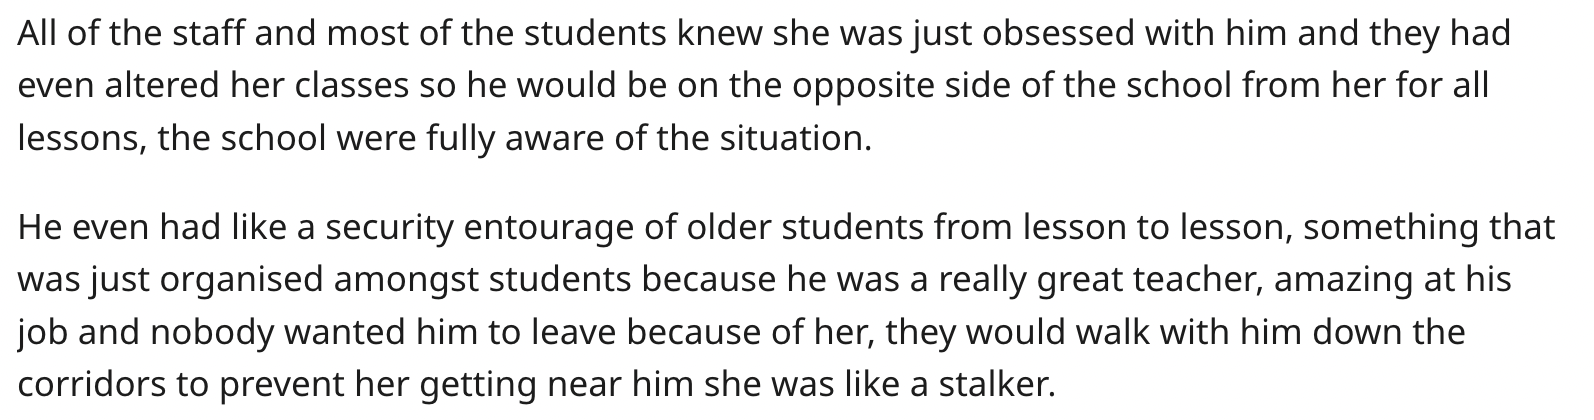 do you mean by citizenship - All of the staff and most of the students knew she was just obsessed with him and they had even altered her classes so he would be on the opposite side of the school from her for all lessons, the school were fully aware of the